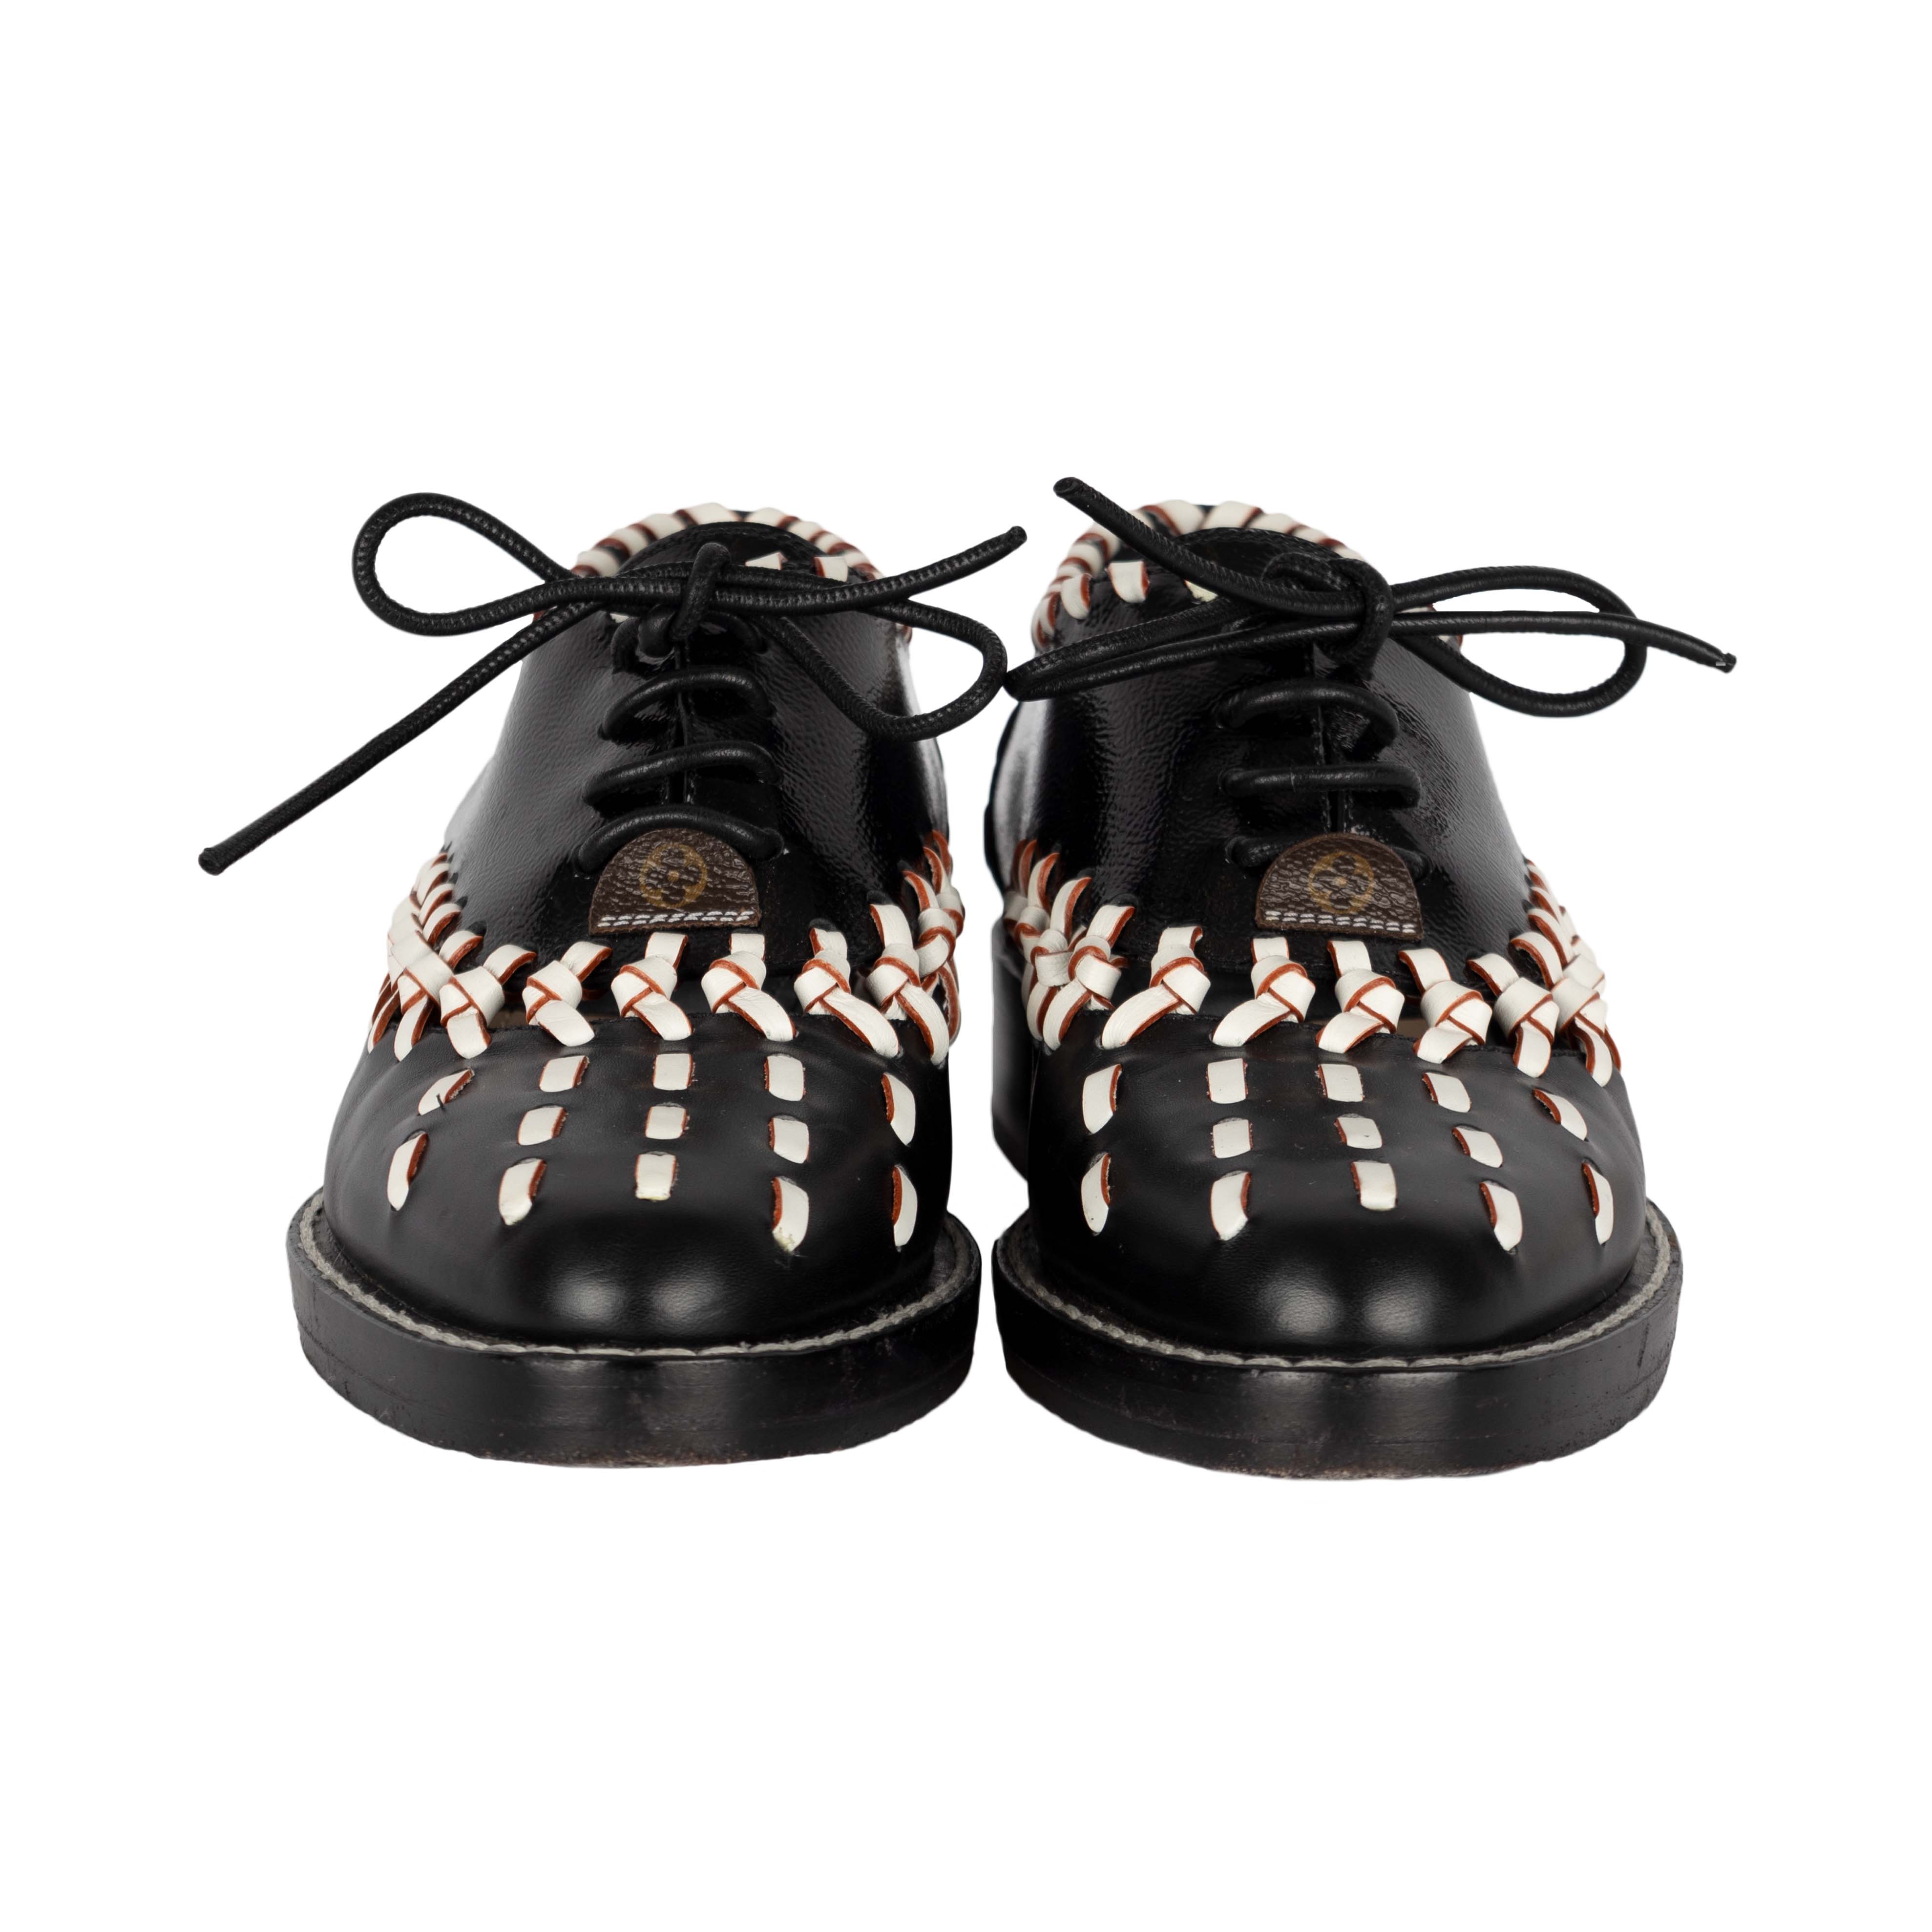 Louis Vuitton Manga Braided Oxford Shoes Second-hand